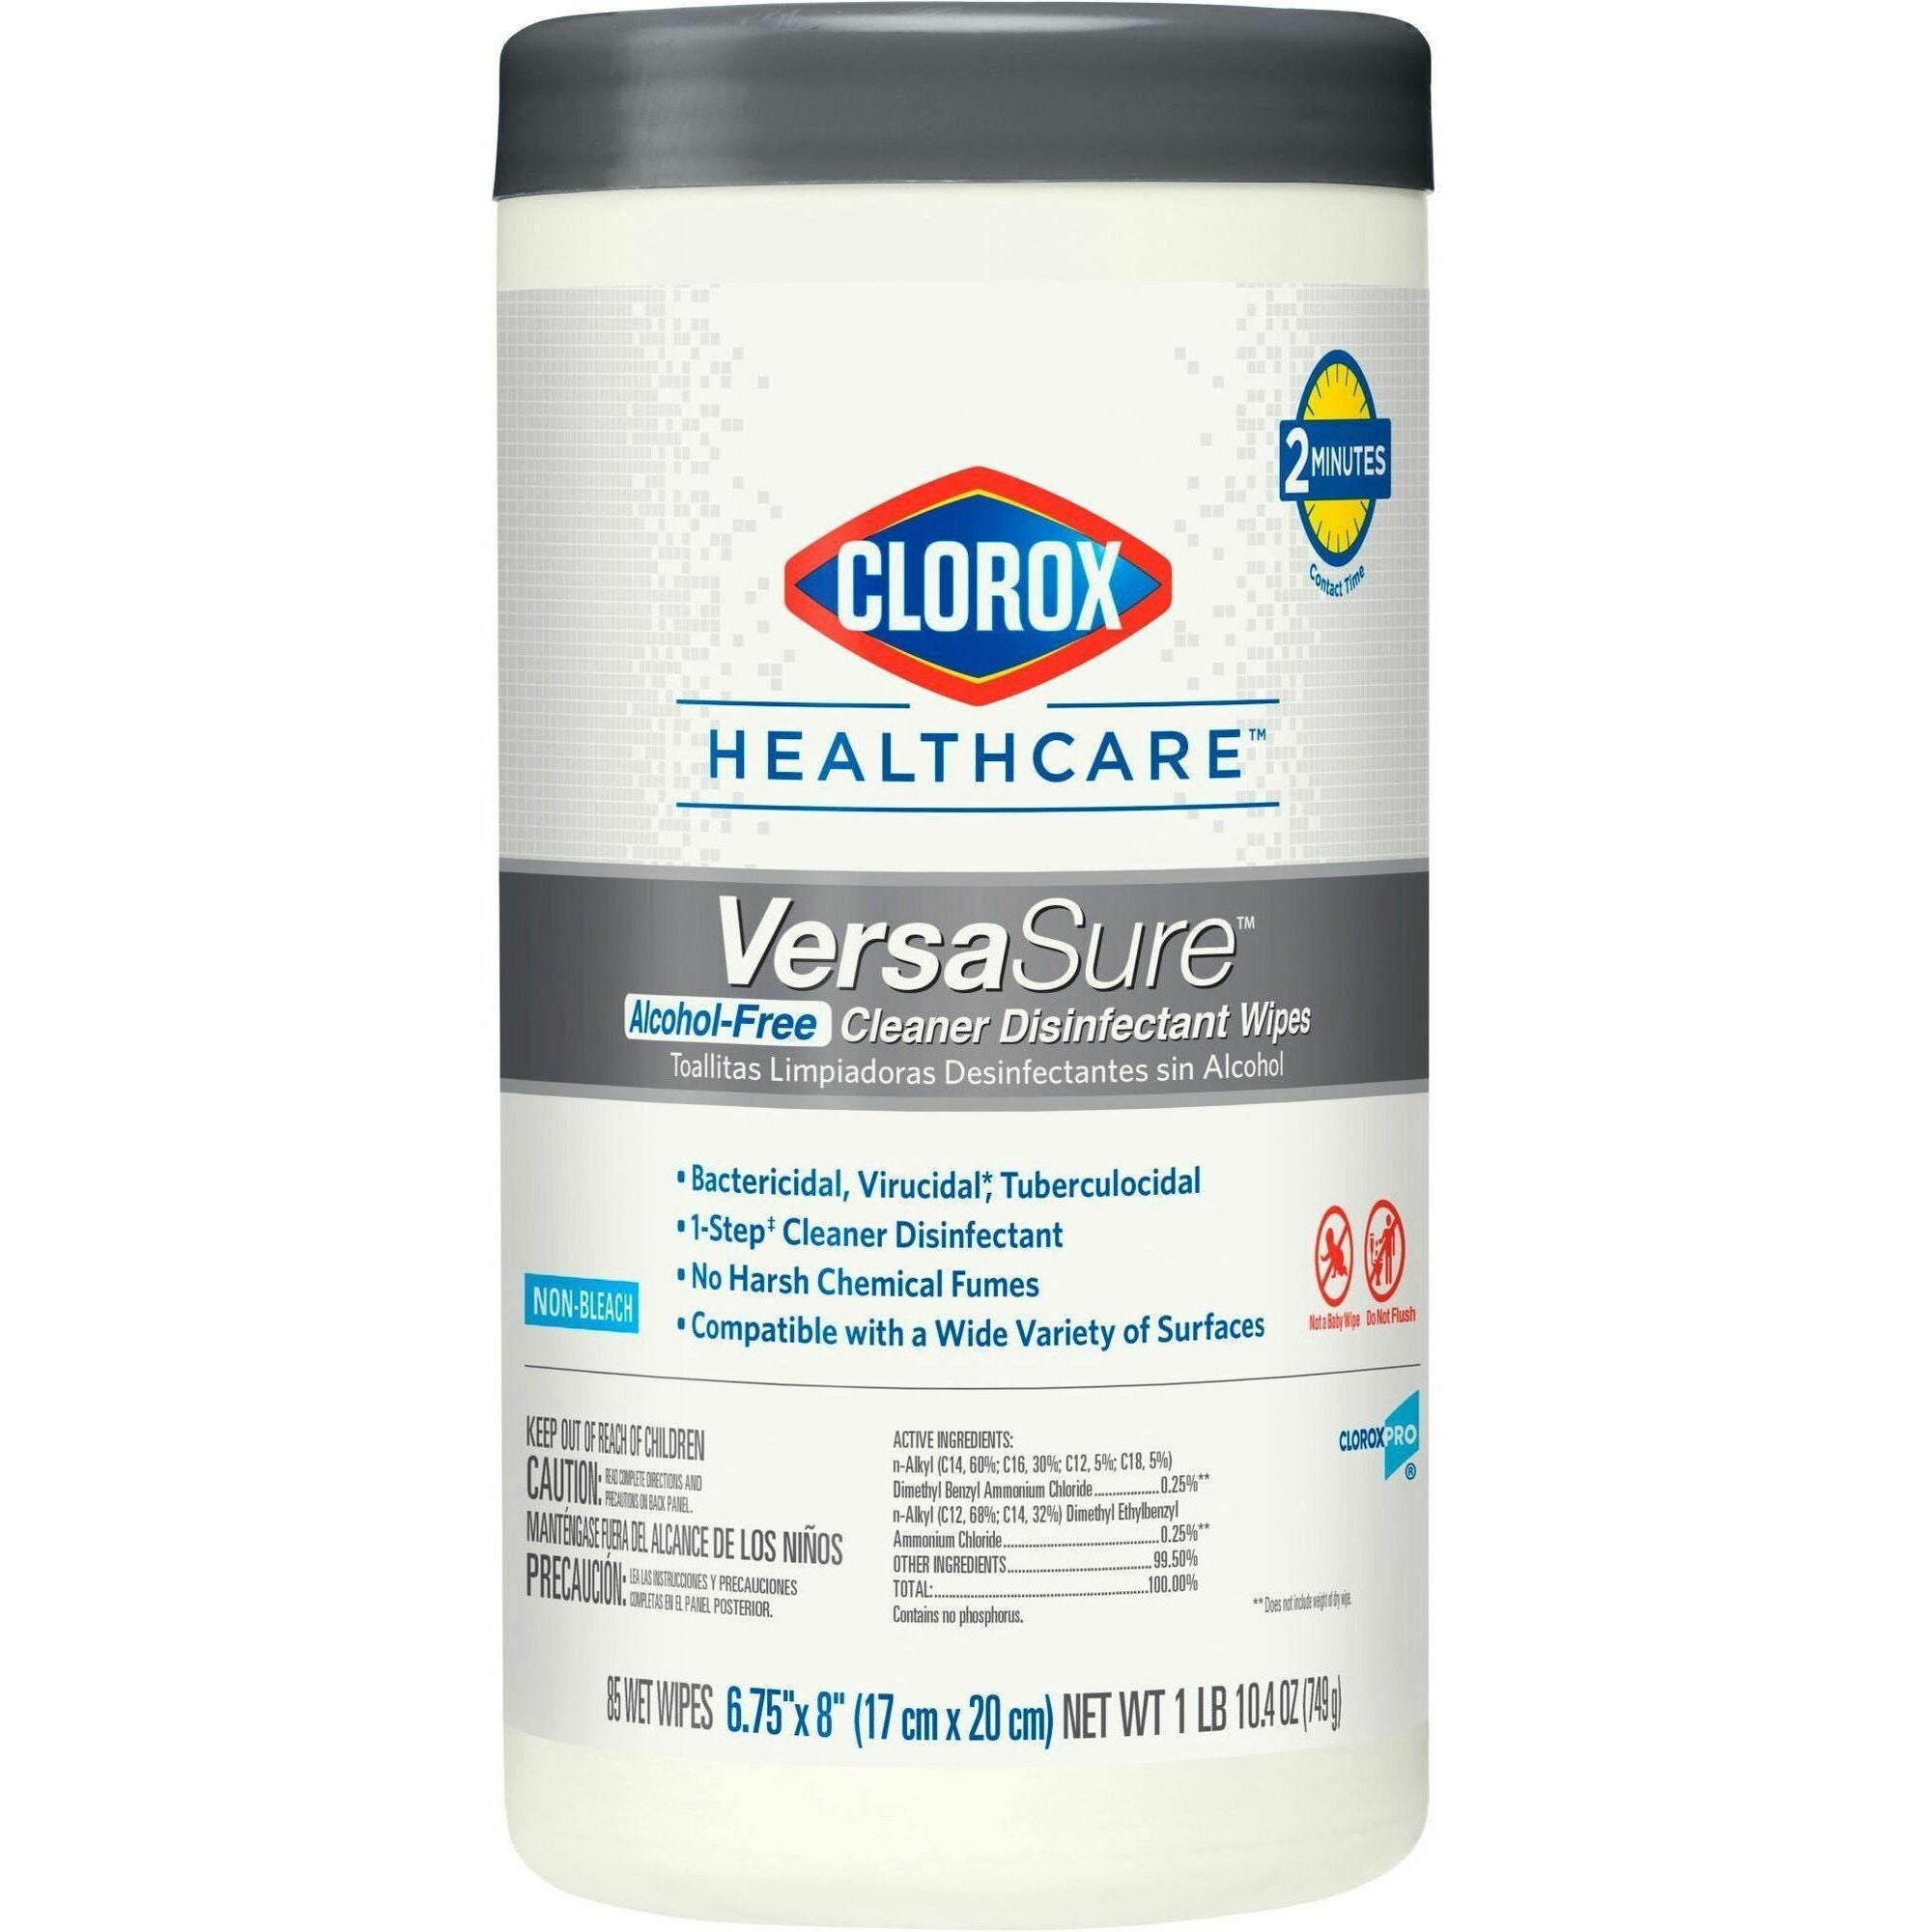 Clorox Healthcare VersaSure Cleaner Disinfectant Wipes - 8" Length x 6.75" Width - 85 / Canister - 450 / Pallet - Durable, Alcohol-free, Low Odor, Fragrance-free, Fume-free, Strong - White - 1